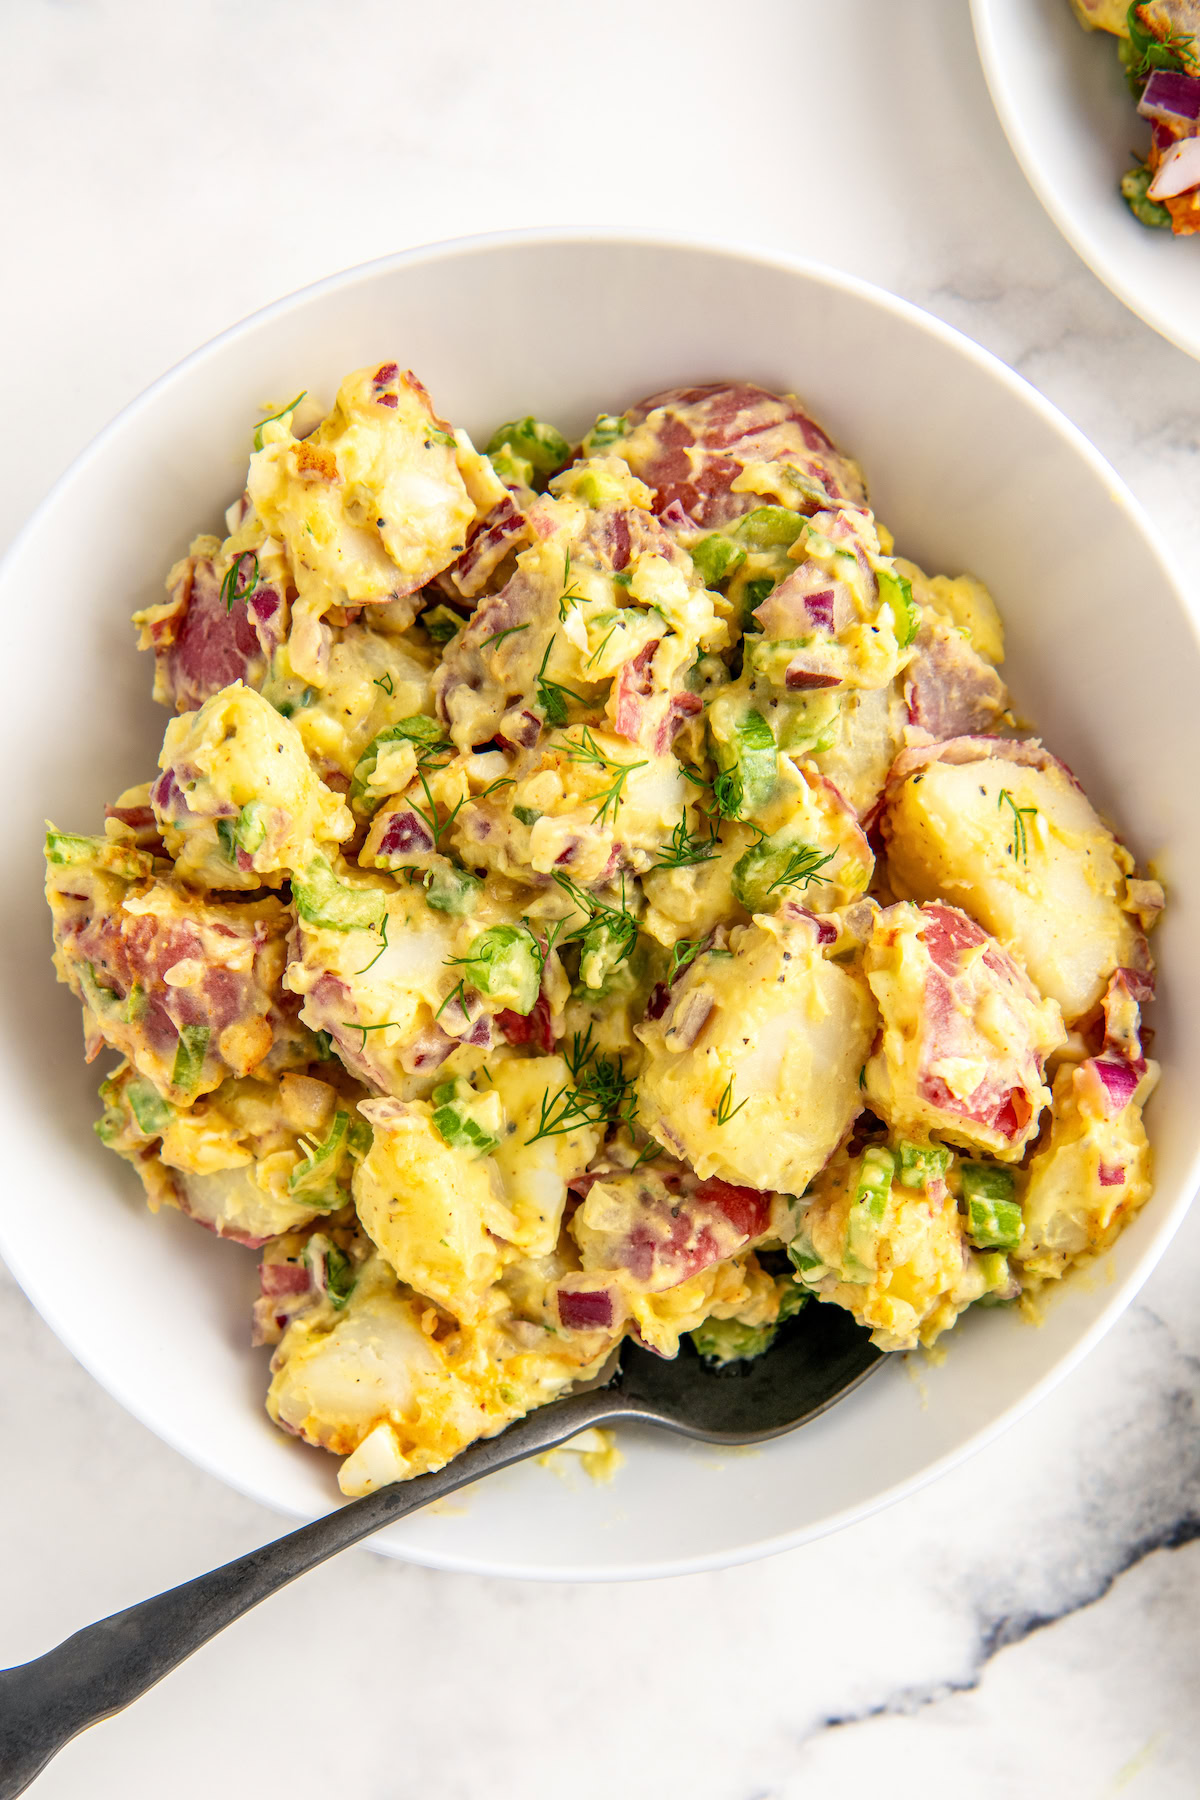 Southern Dill Potato Salad: A Tangy Tradition Perfect for Summer Gatherings